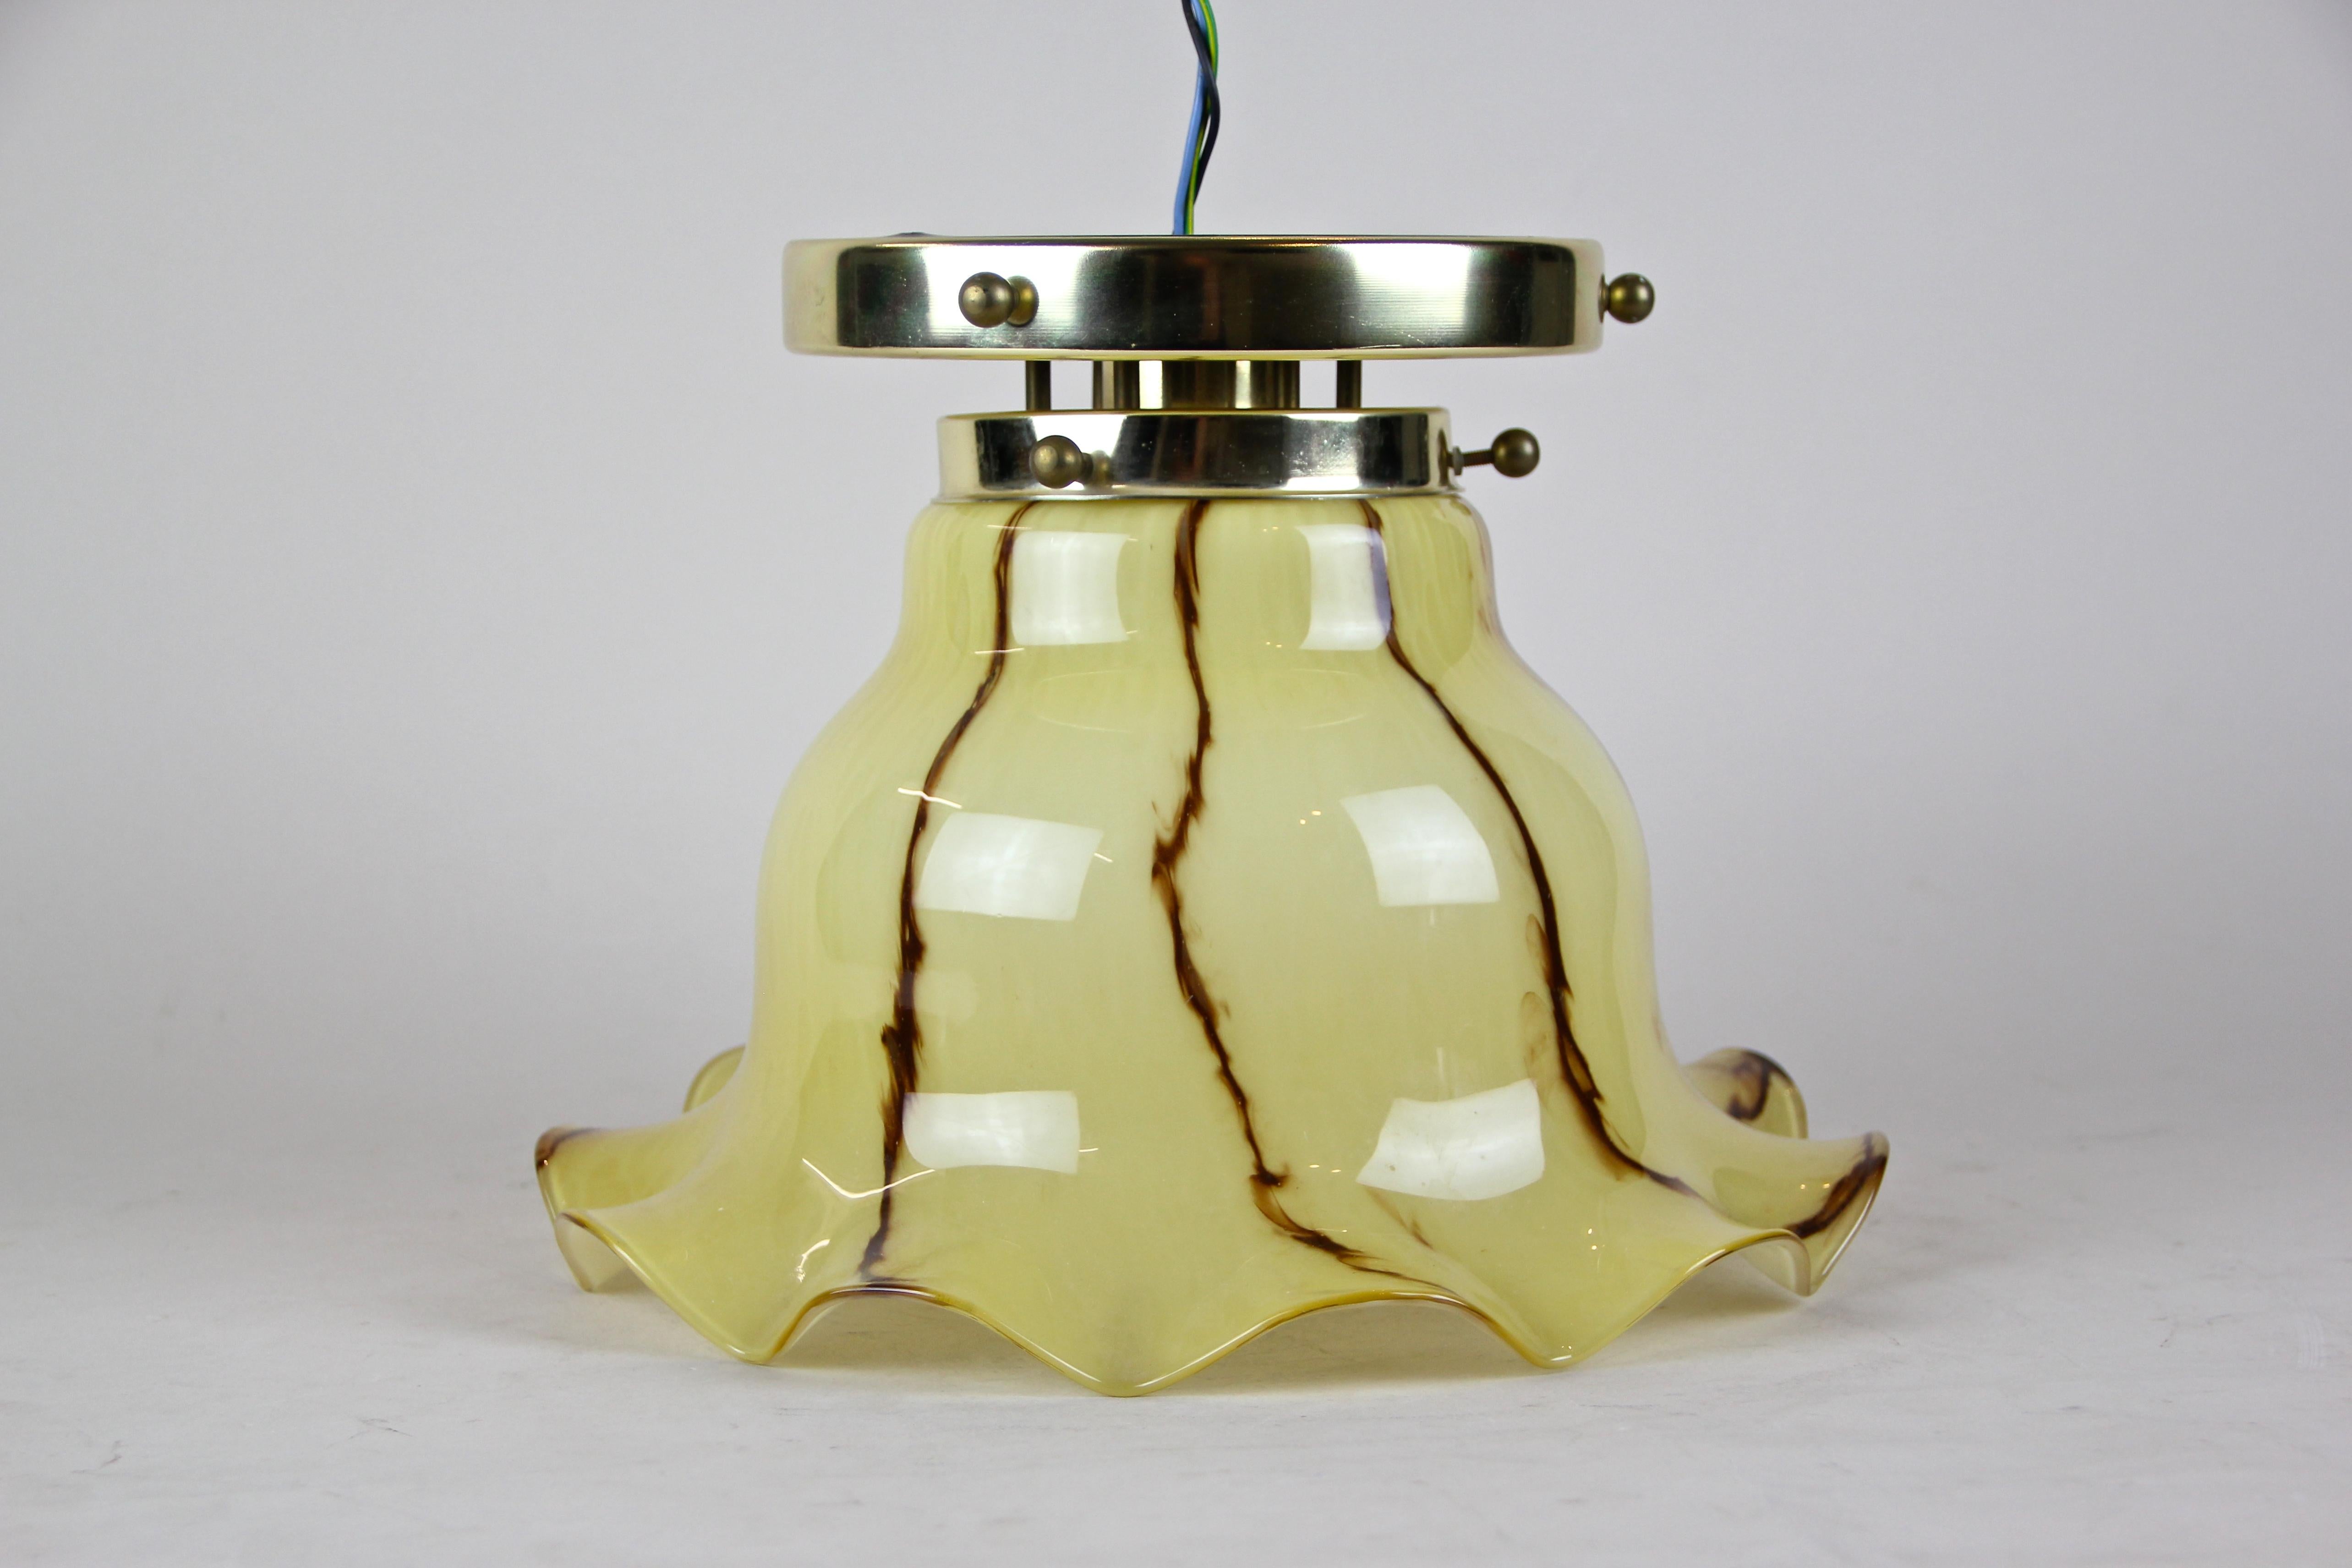 Beautiful midcentury flush mount lightning from Austria, circa 1950. The lovely lamp impresses with the original large frilly glass lampshade colored in yellow/ beige tones, crisscrossed by brown lines. A real nice piece of a midcentury lighting.